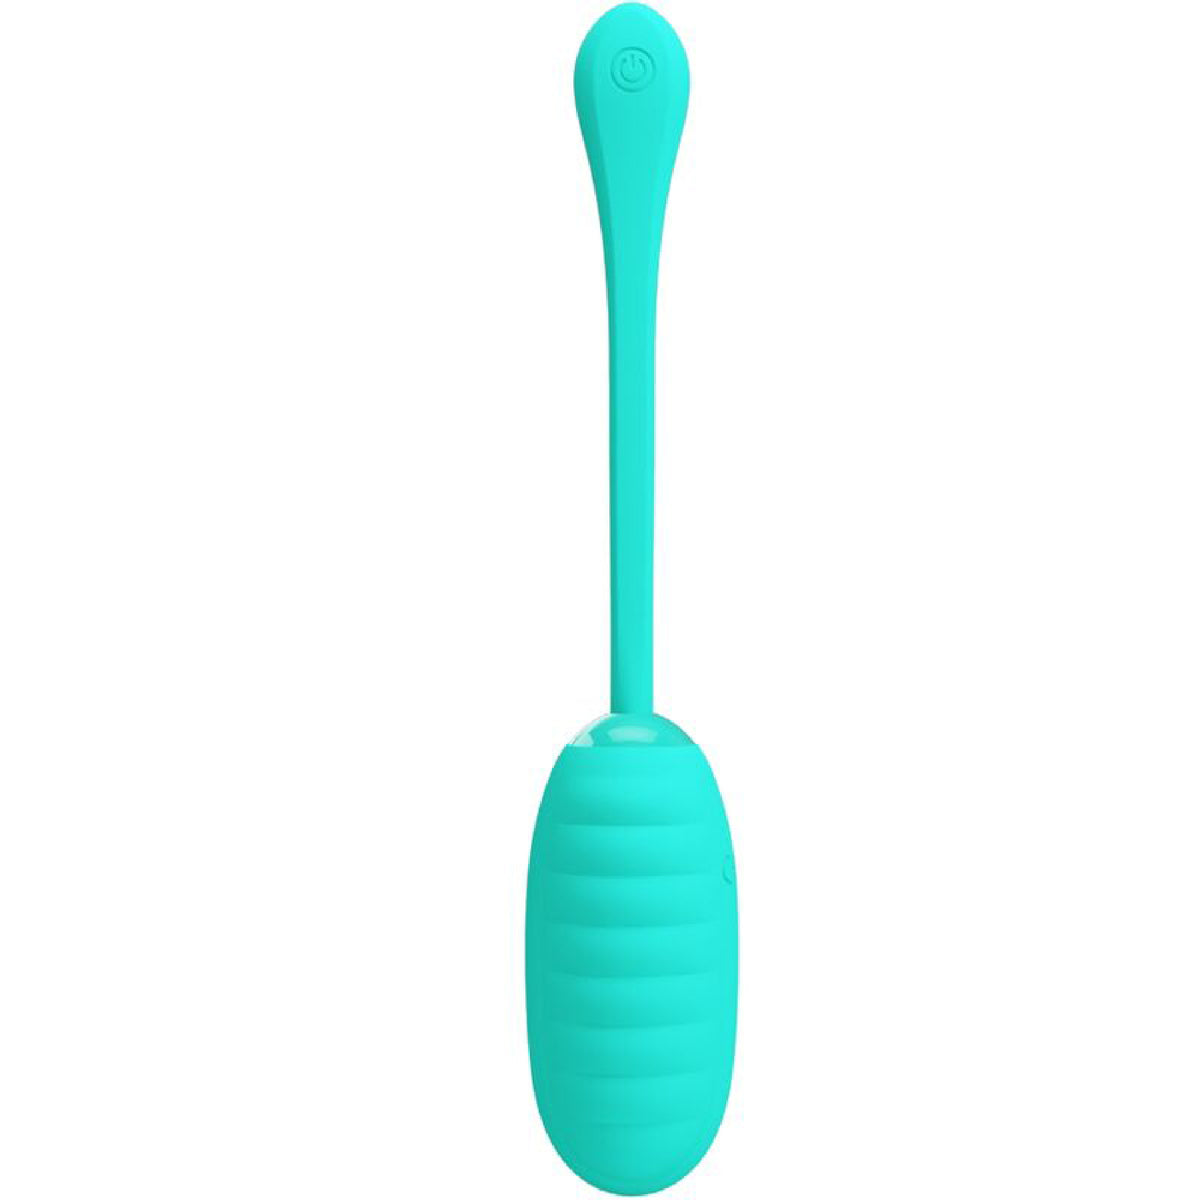 Kirk Rechargeable Vibrating Egg - Turquoise